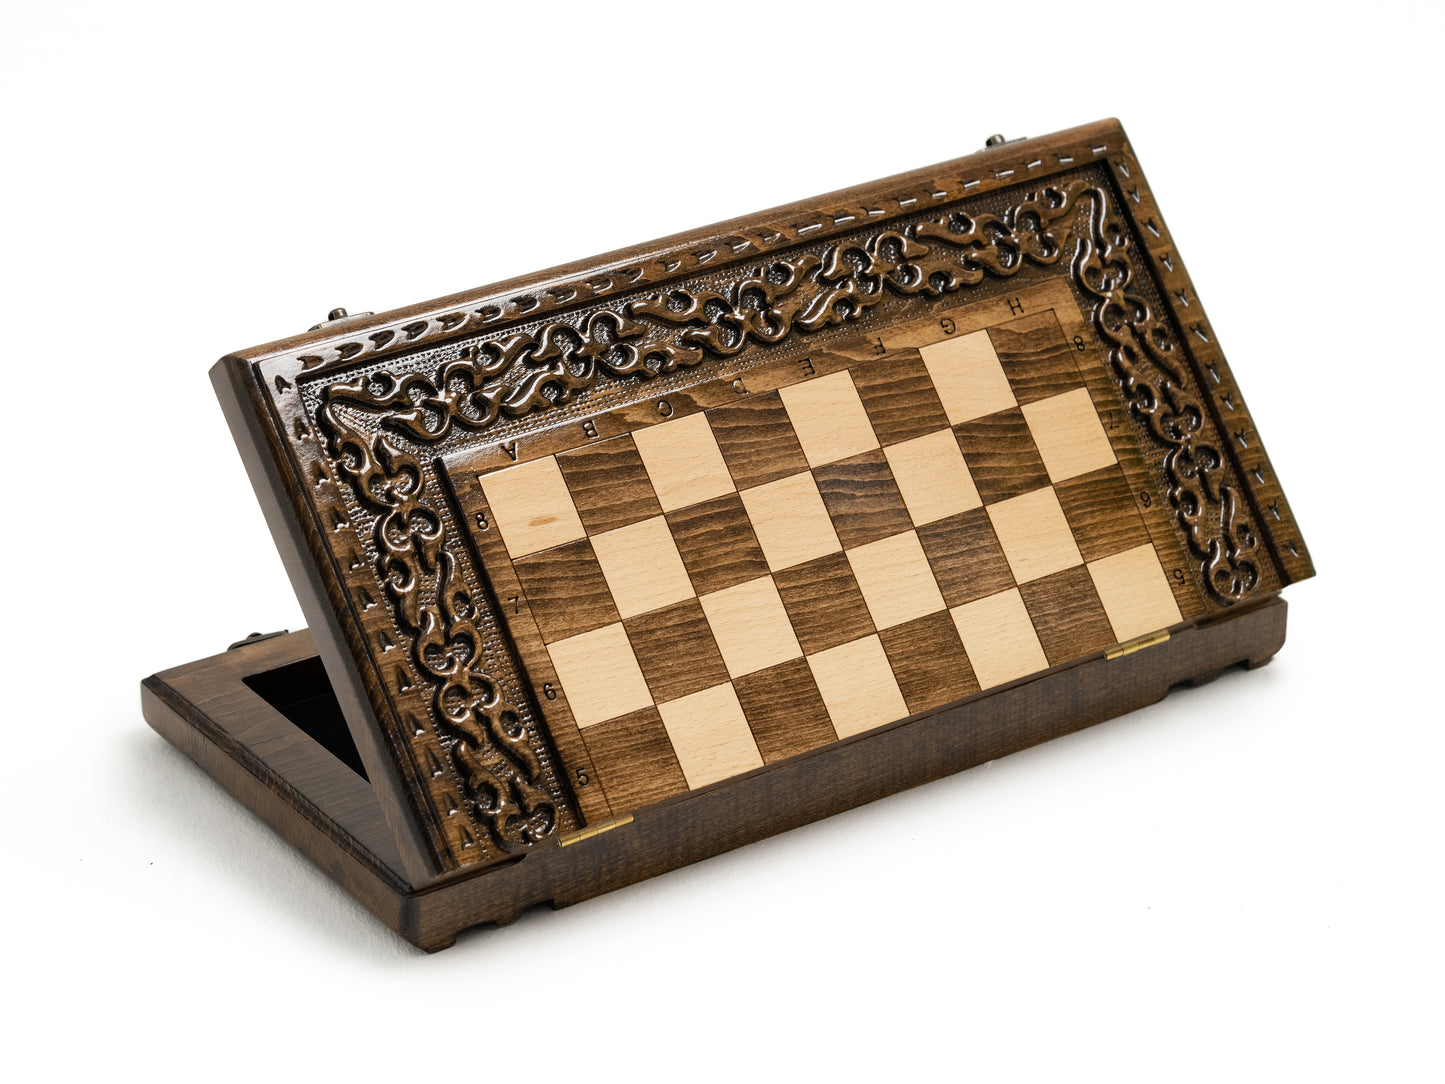 Premium wooden chess set, a blend of artistry and functionality